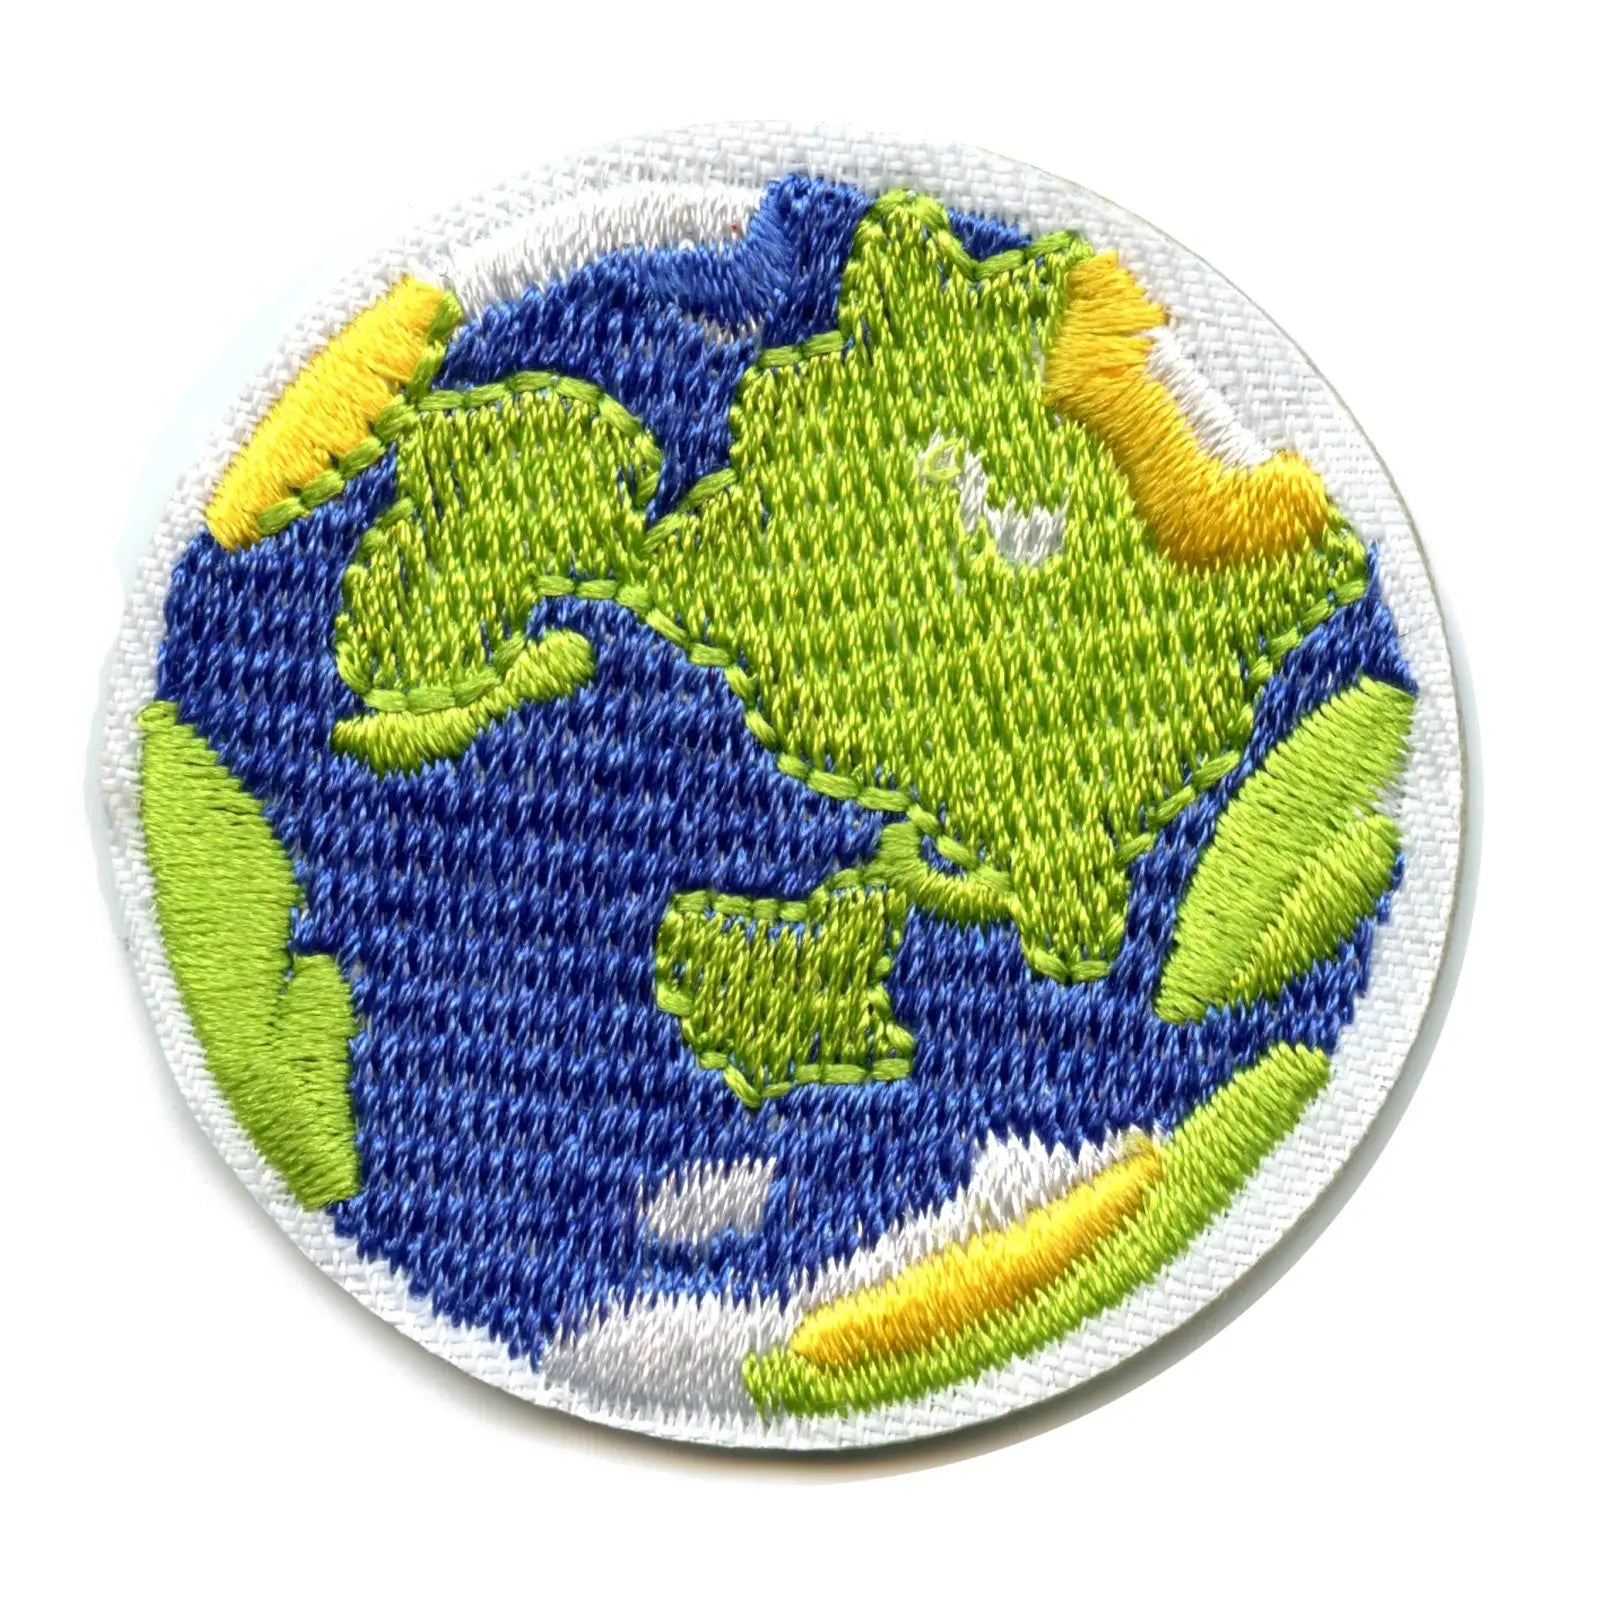 Small Planet Earth Embroidered Iron On Patch 